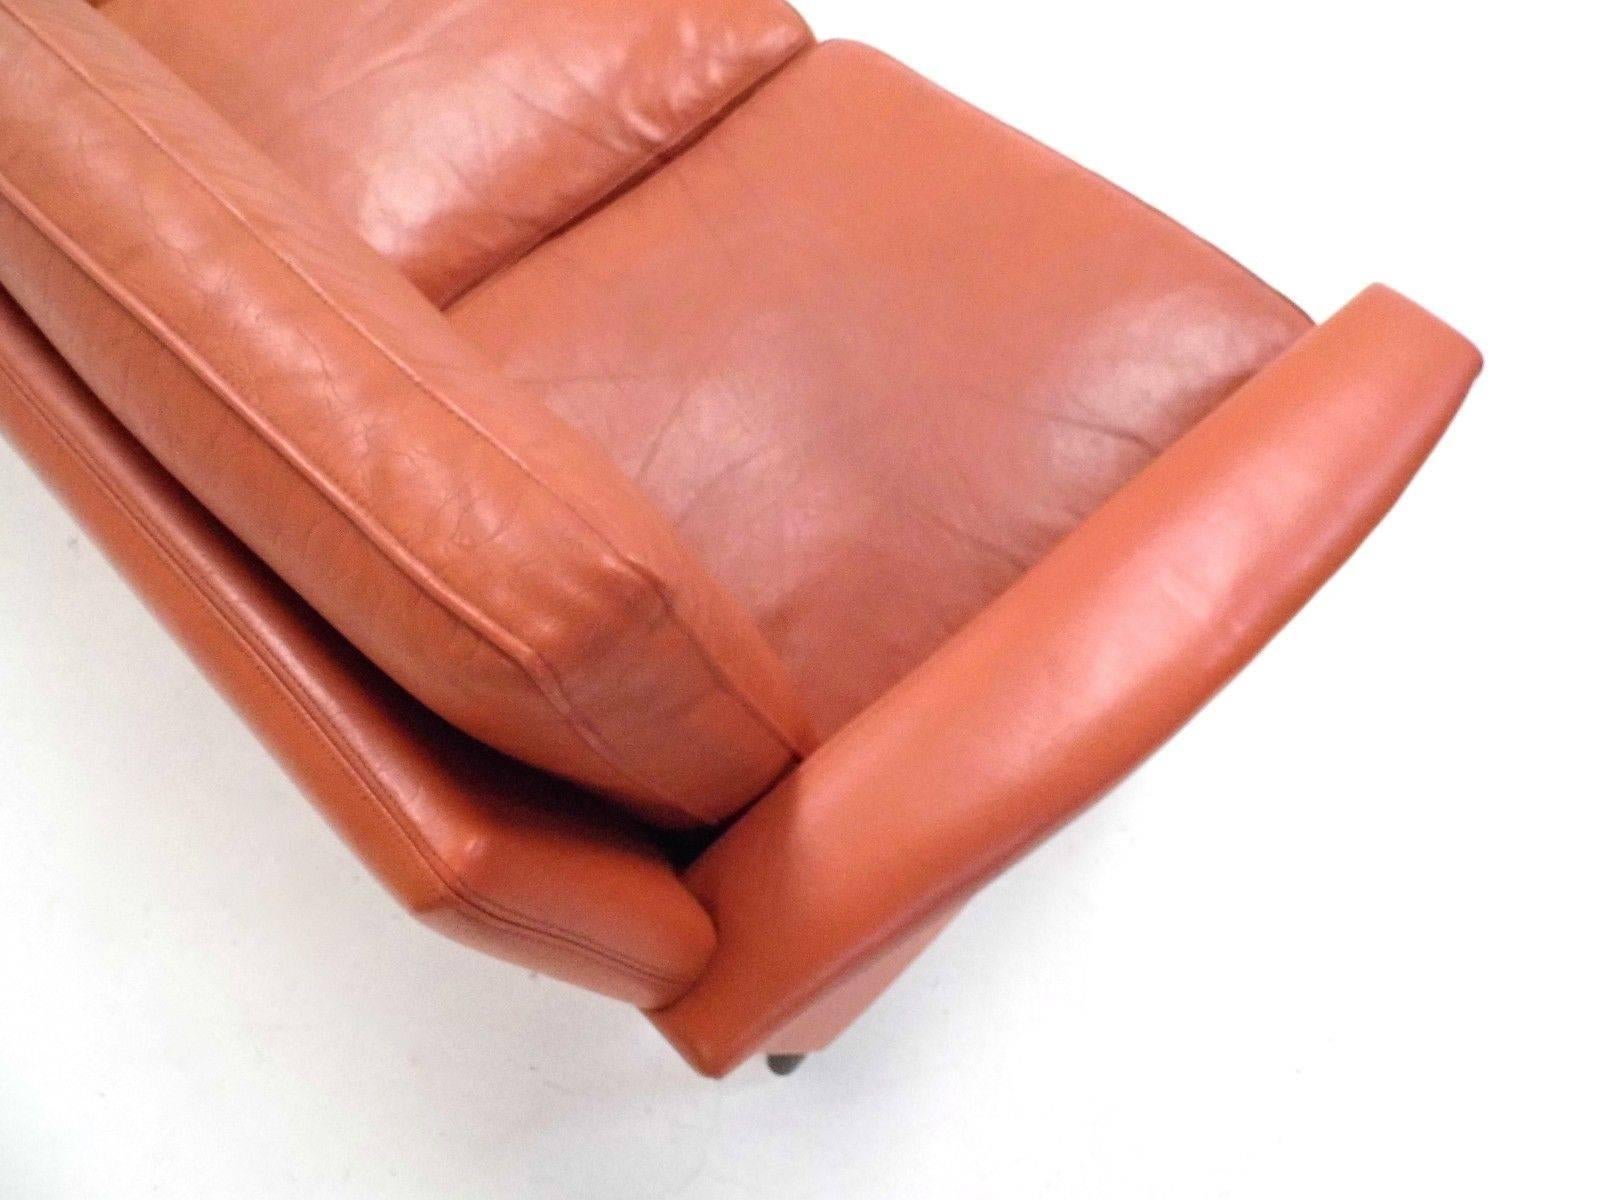 A beautiful Danish orange tan leather three-seat sofa, this would make a stylish addition to any living or work area. The sofa has wide cushions and sculptured padded armrests for enhanced comfort. A striking piece of Classic Scandinavian